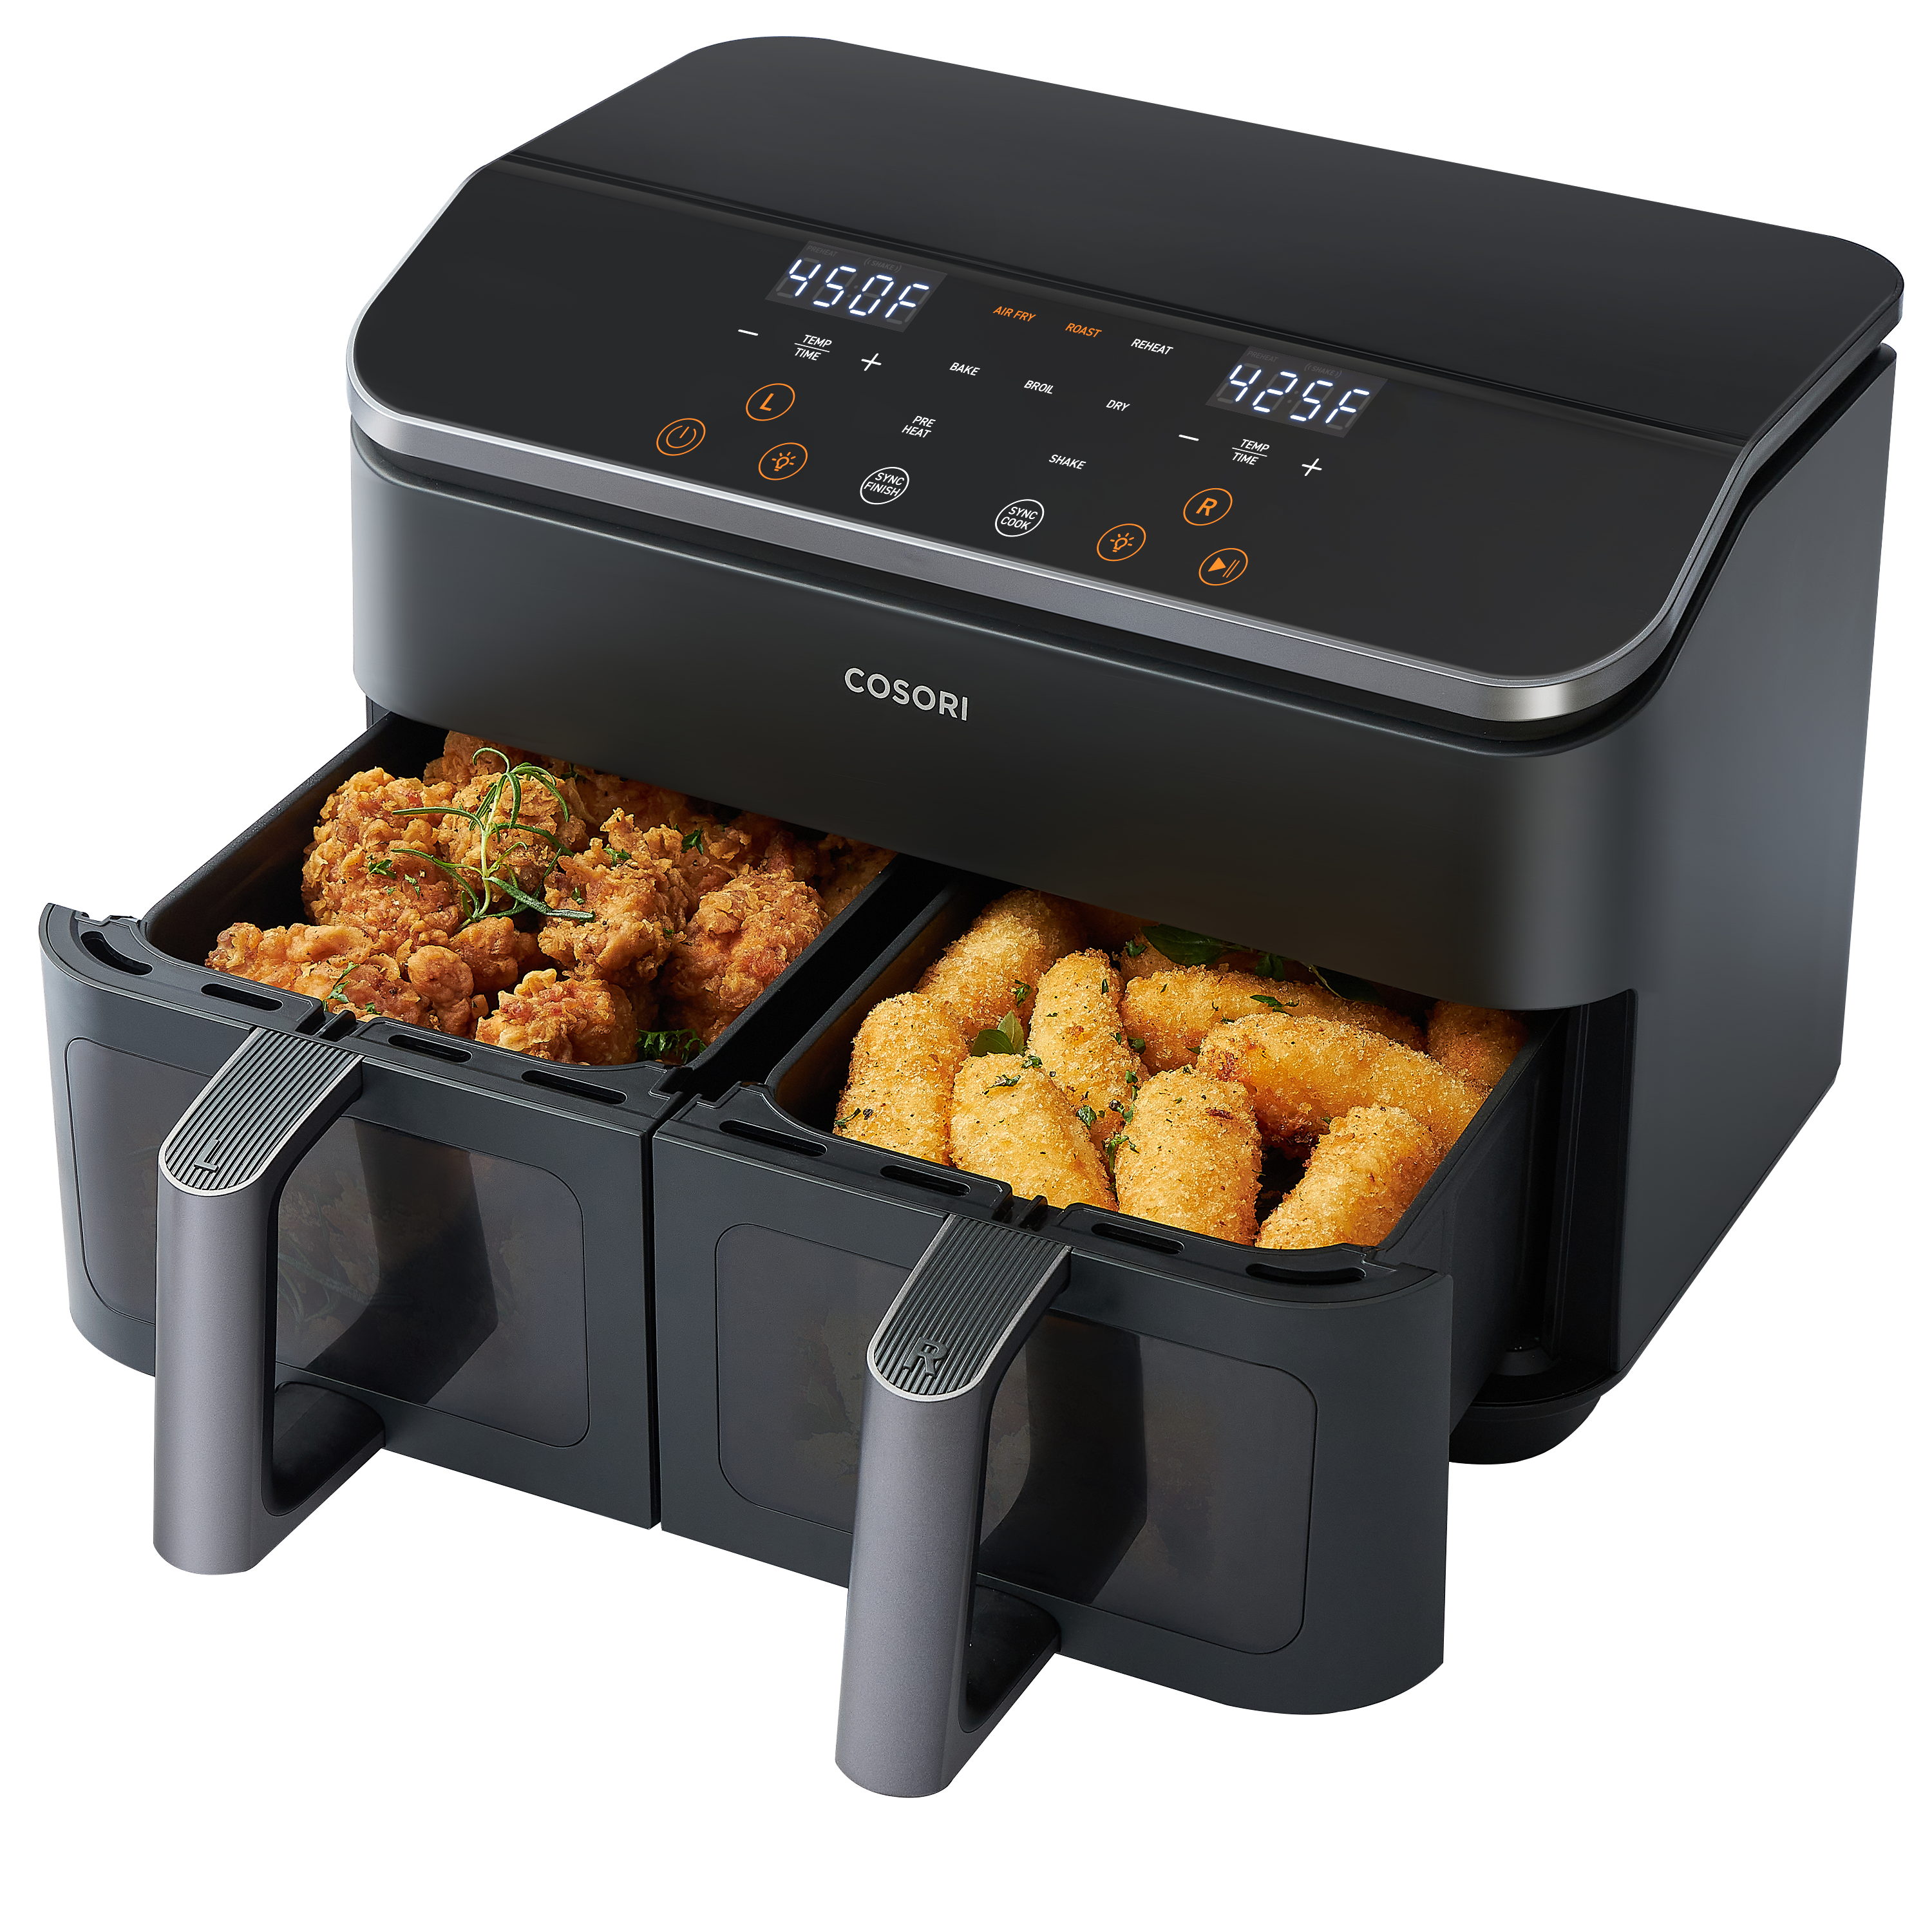 Cosori Air fryer Recipes + Tips  Guys can you help with the Dual blaze or  the turbo cosori